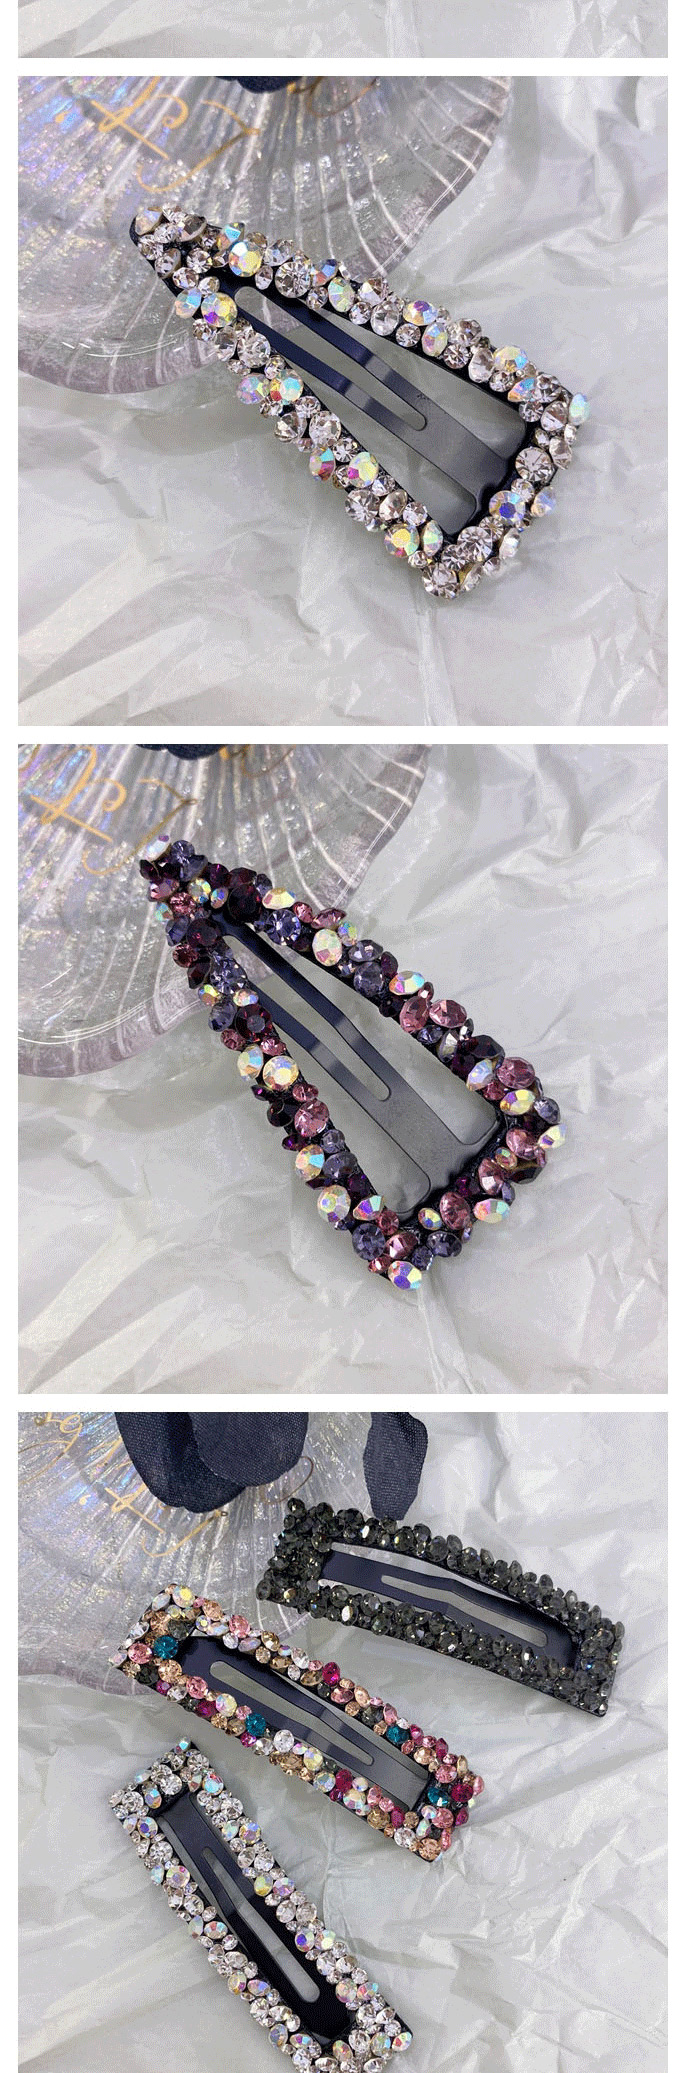 Fashion Fang Meihong Diamond-shaped Seamless Crystal Hollow Water Drop Square Triangle Hairpin,Hairpins